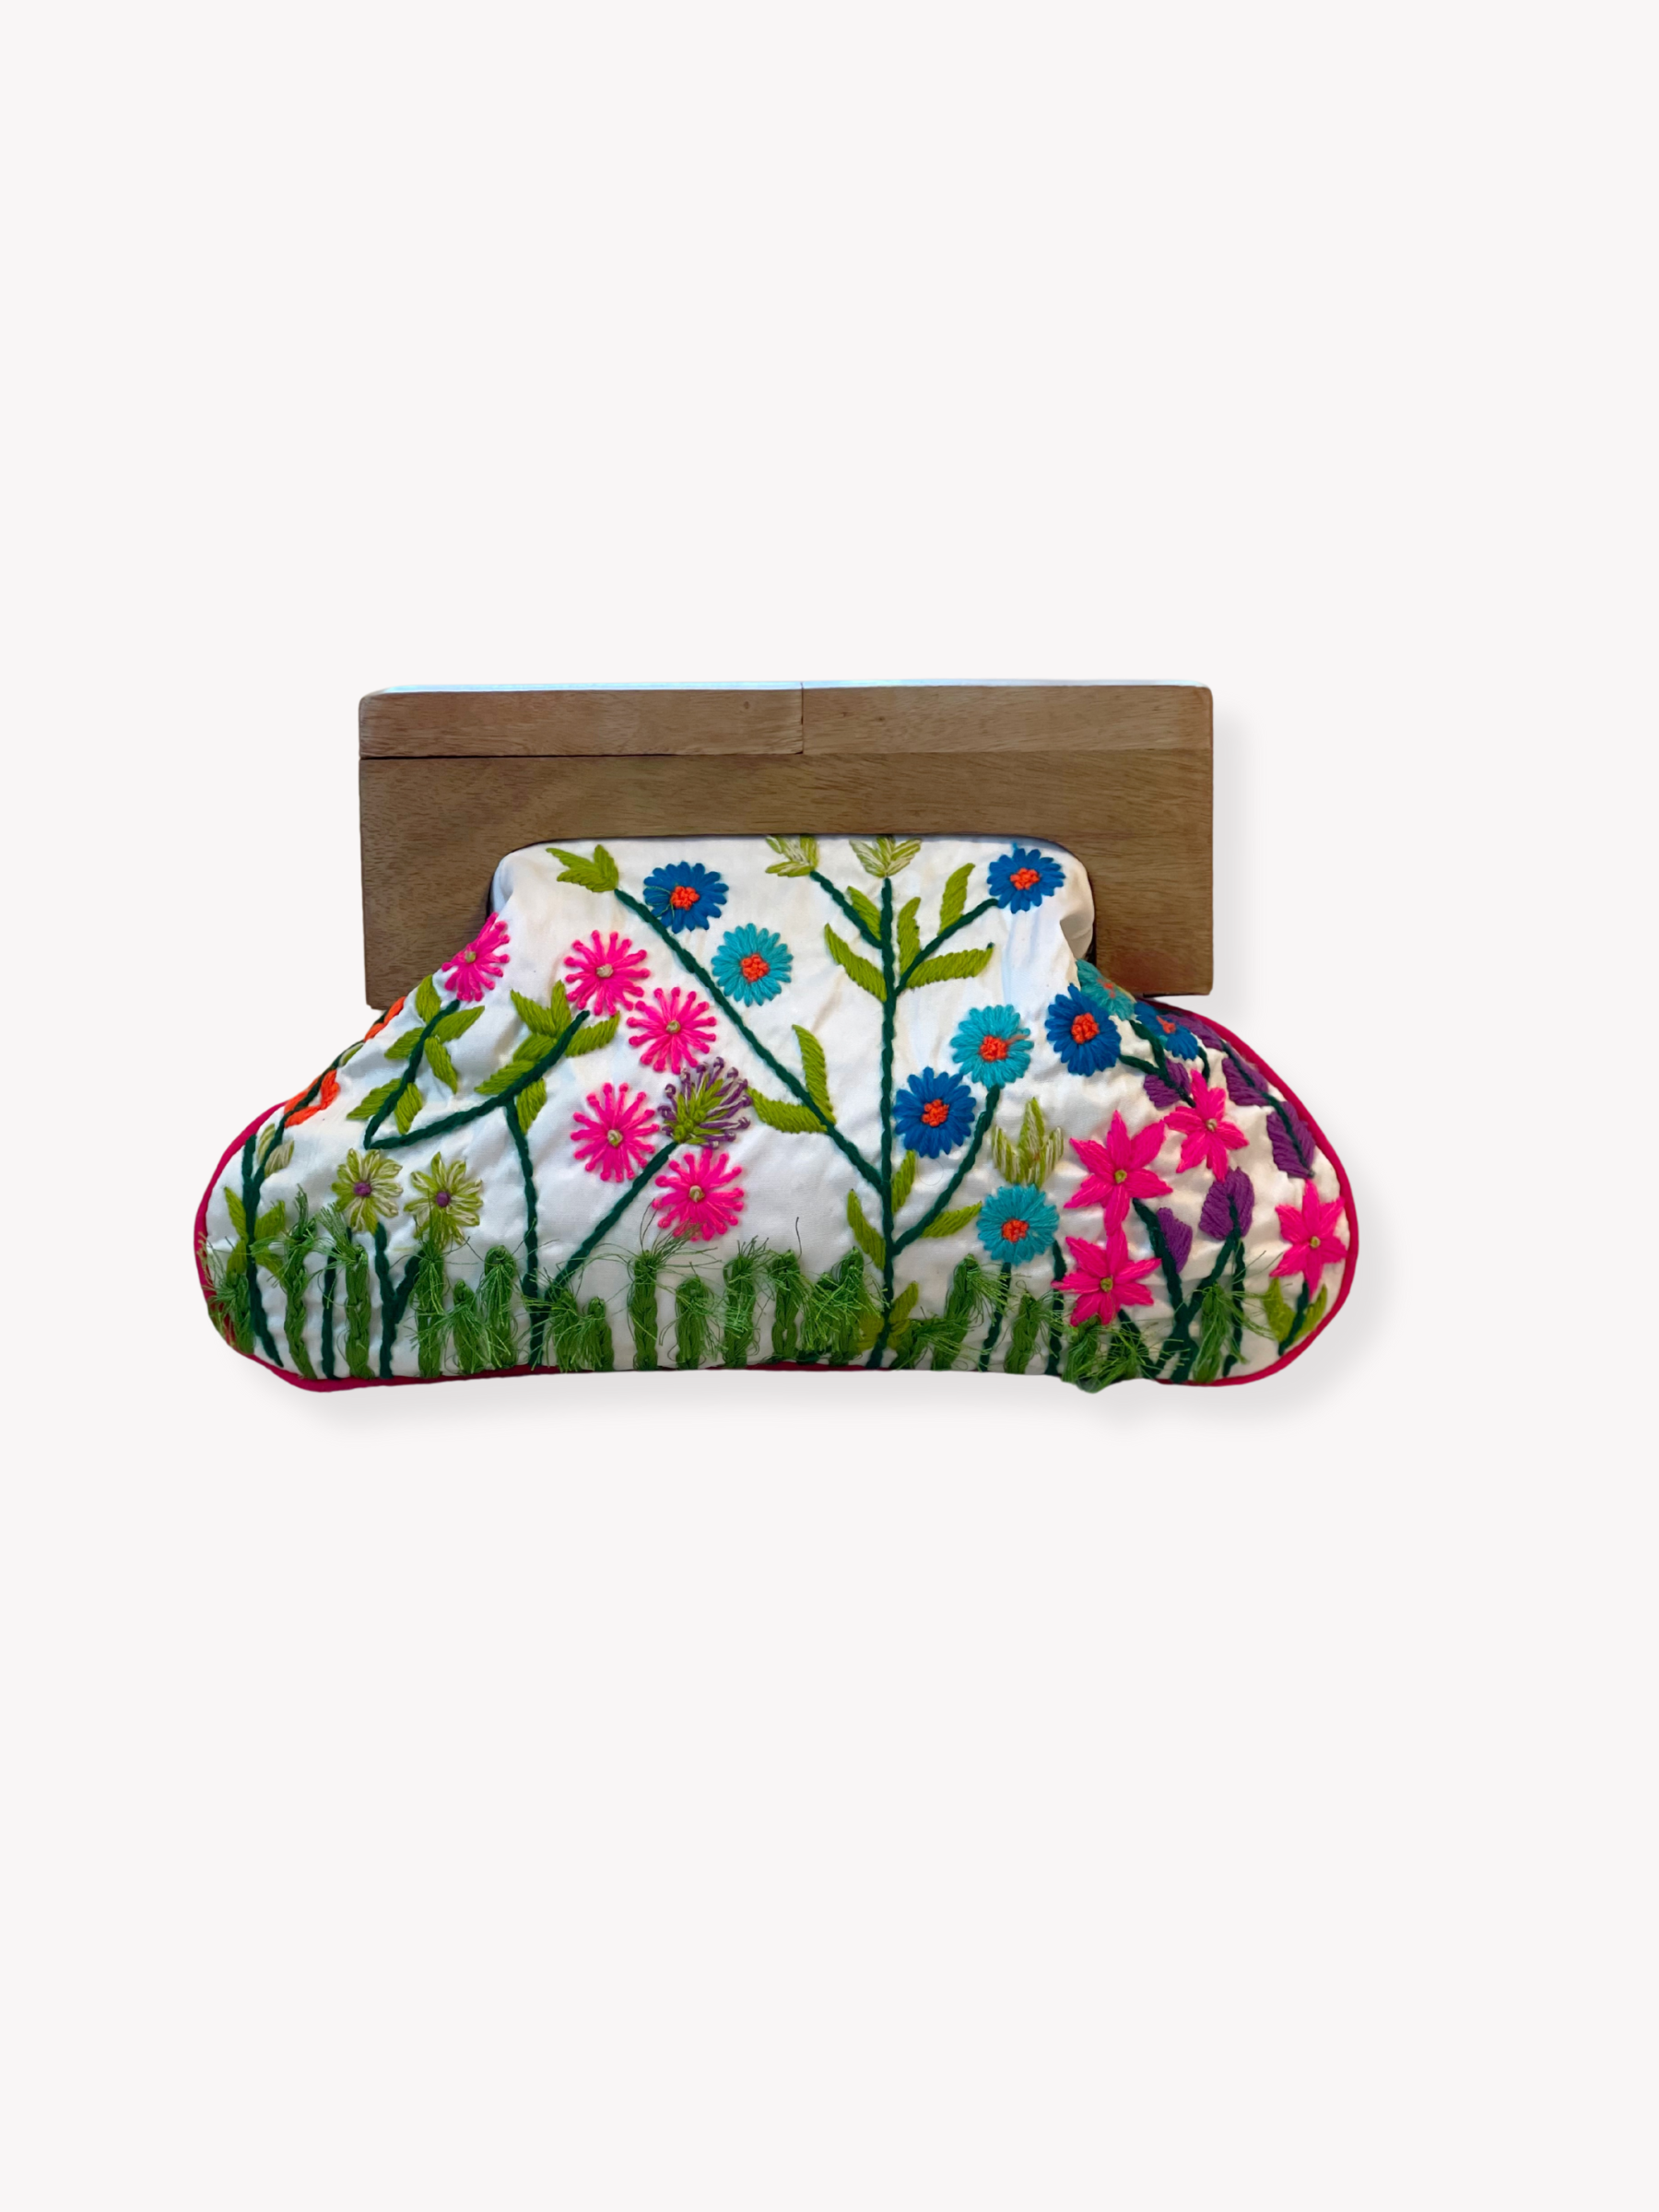 GOLDxTEAL gorgeous colorful embroidered clutch with wooden handle.